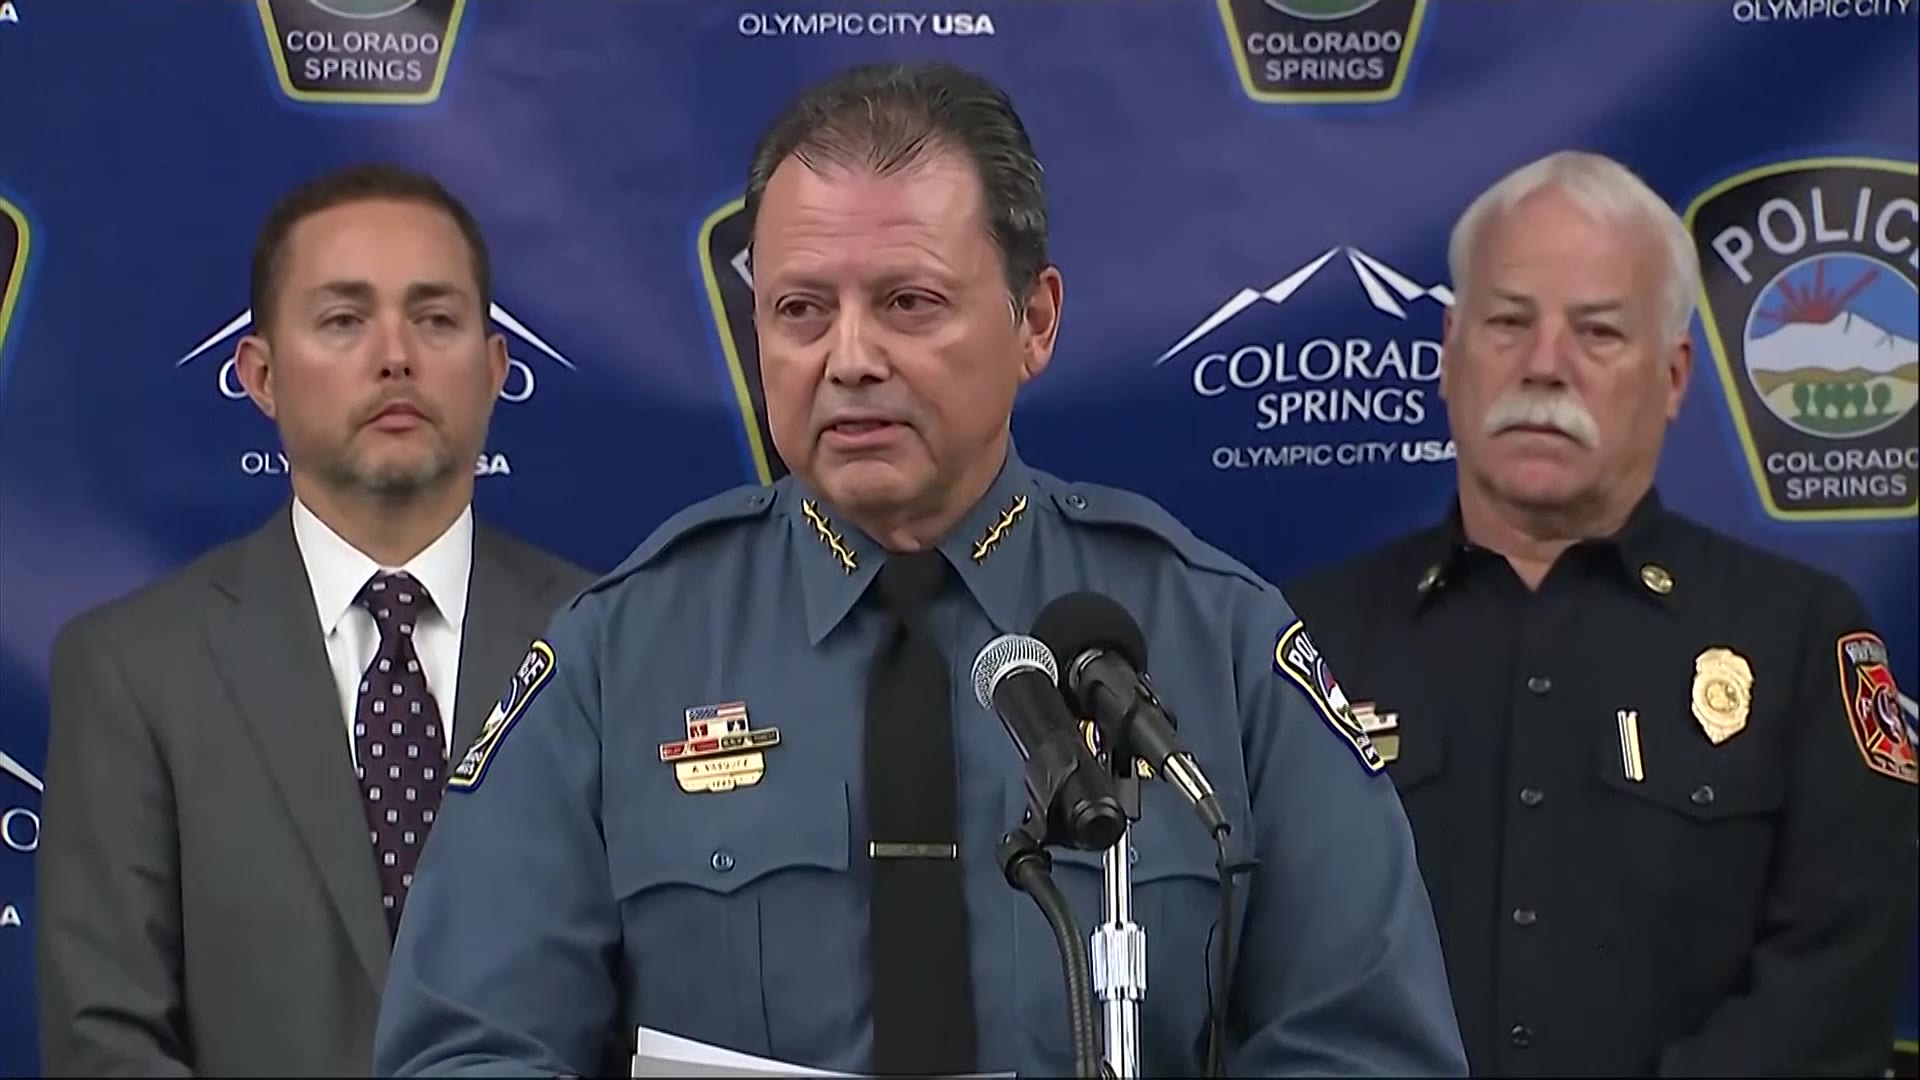 Anderson Lee Aldrich: What we know about Colorado Springs suspect who shot  on eve of Transgender Day of Remembrance | The Independent